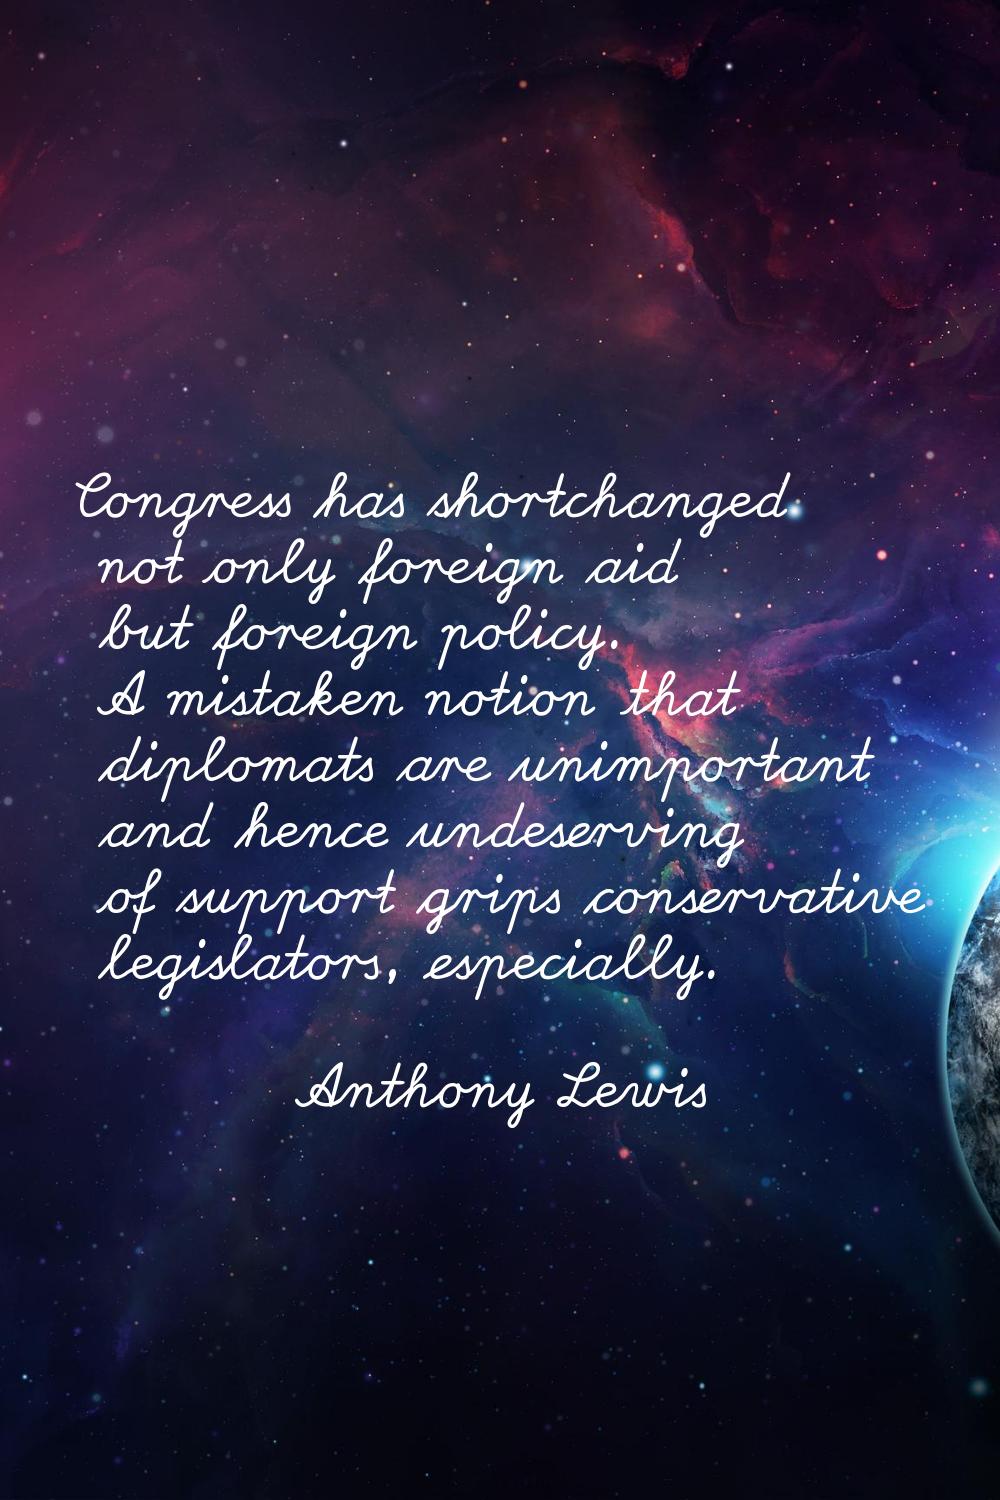 Congress has shortchanged not only foreign aid but foreign policy. A mistaken notion that diplomats